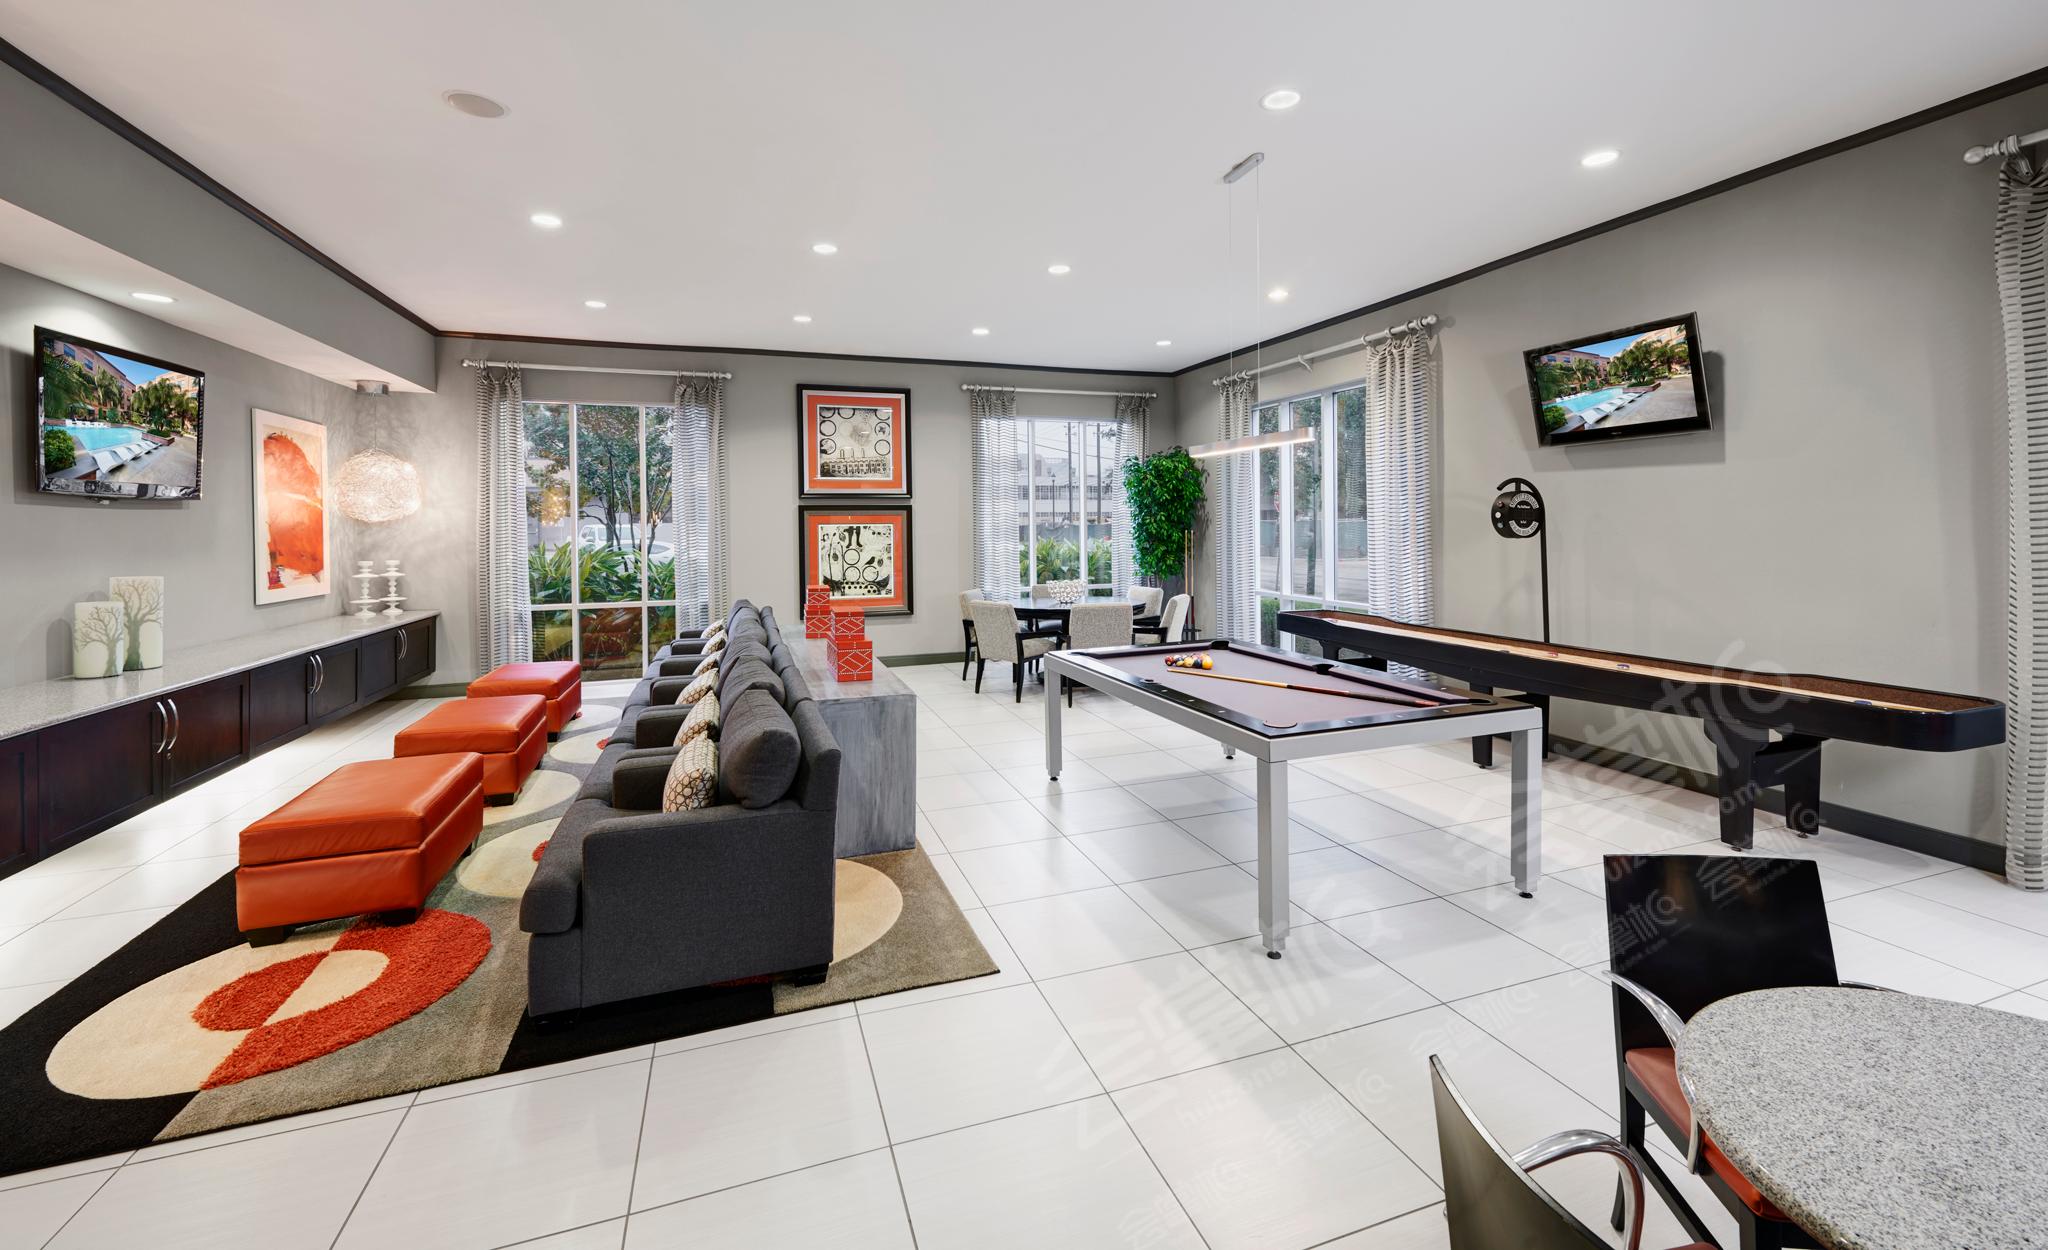 Spacious Event Space with Lounge Seating, Gourmet Kitchen, and Games for Entertaining - Travis Street